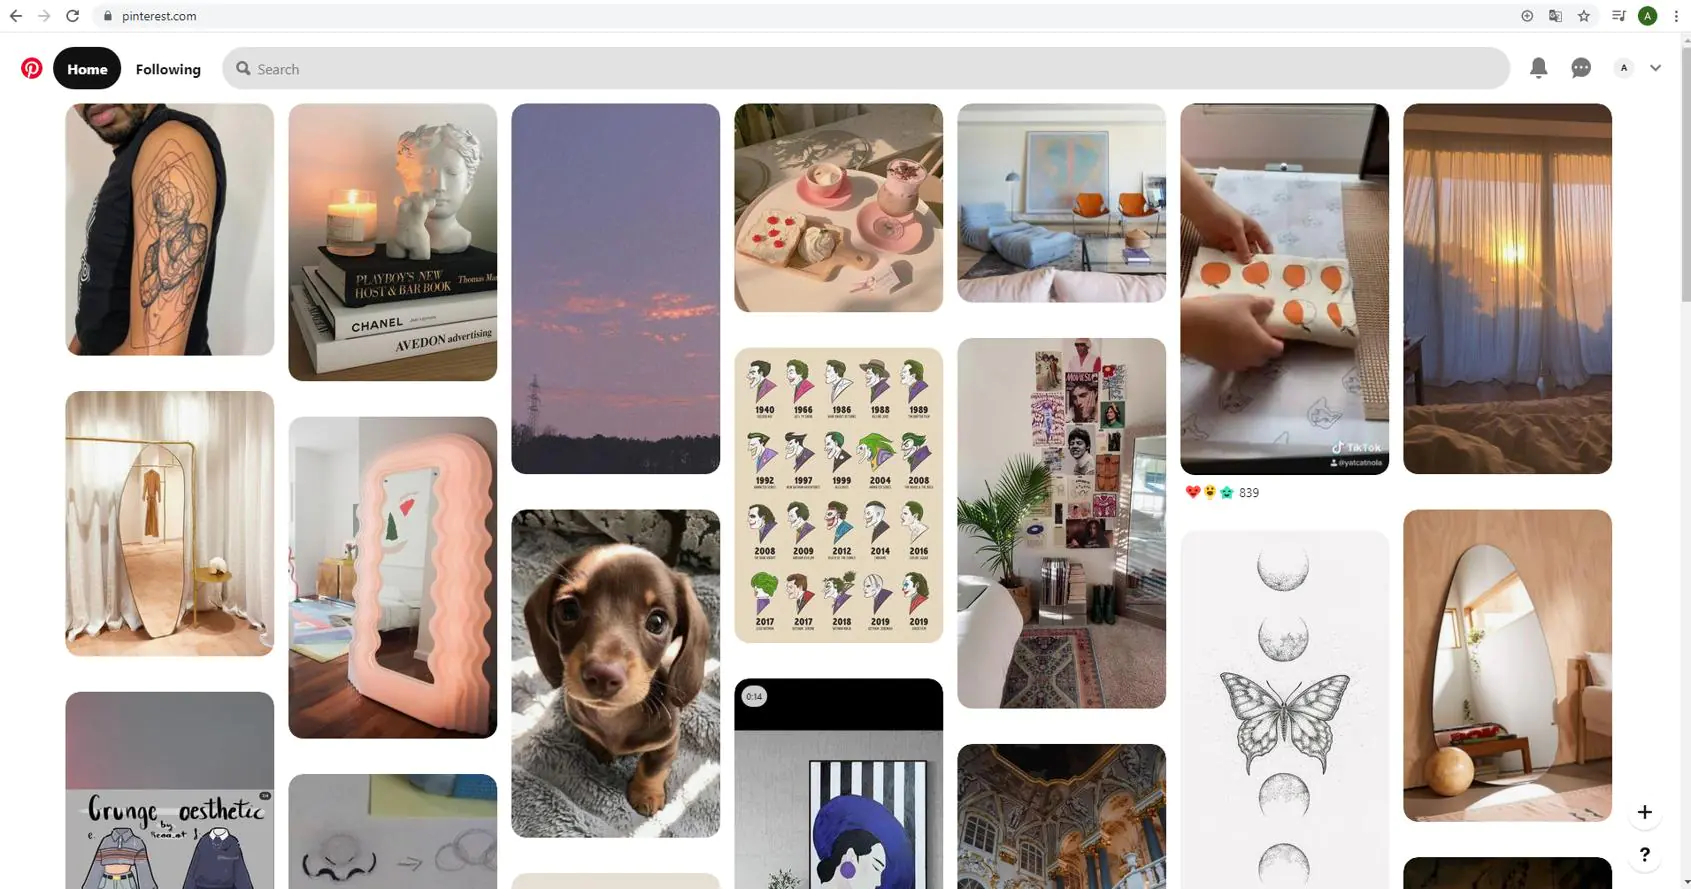 What a Pinterest’s website newsfeed looks like